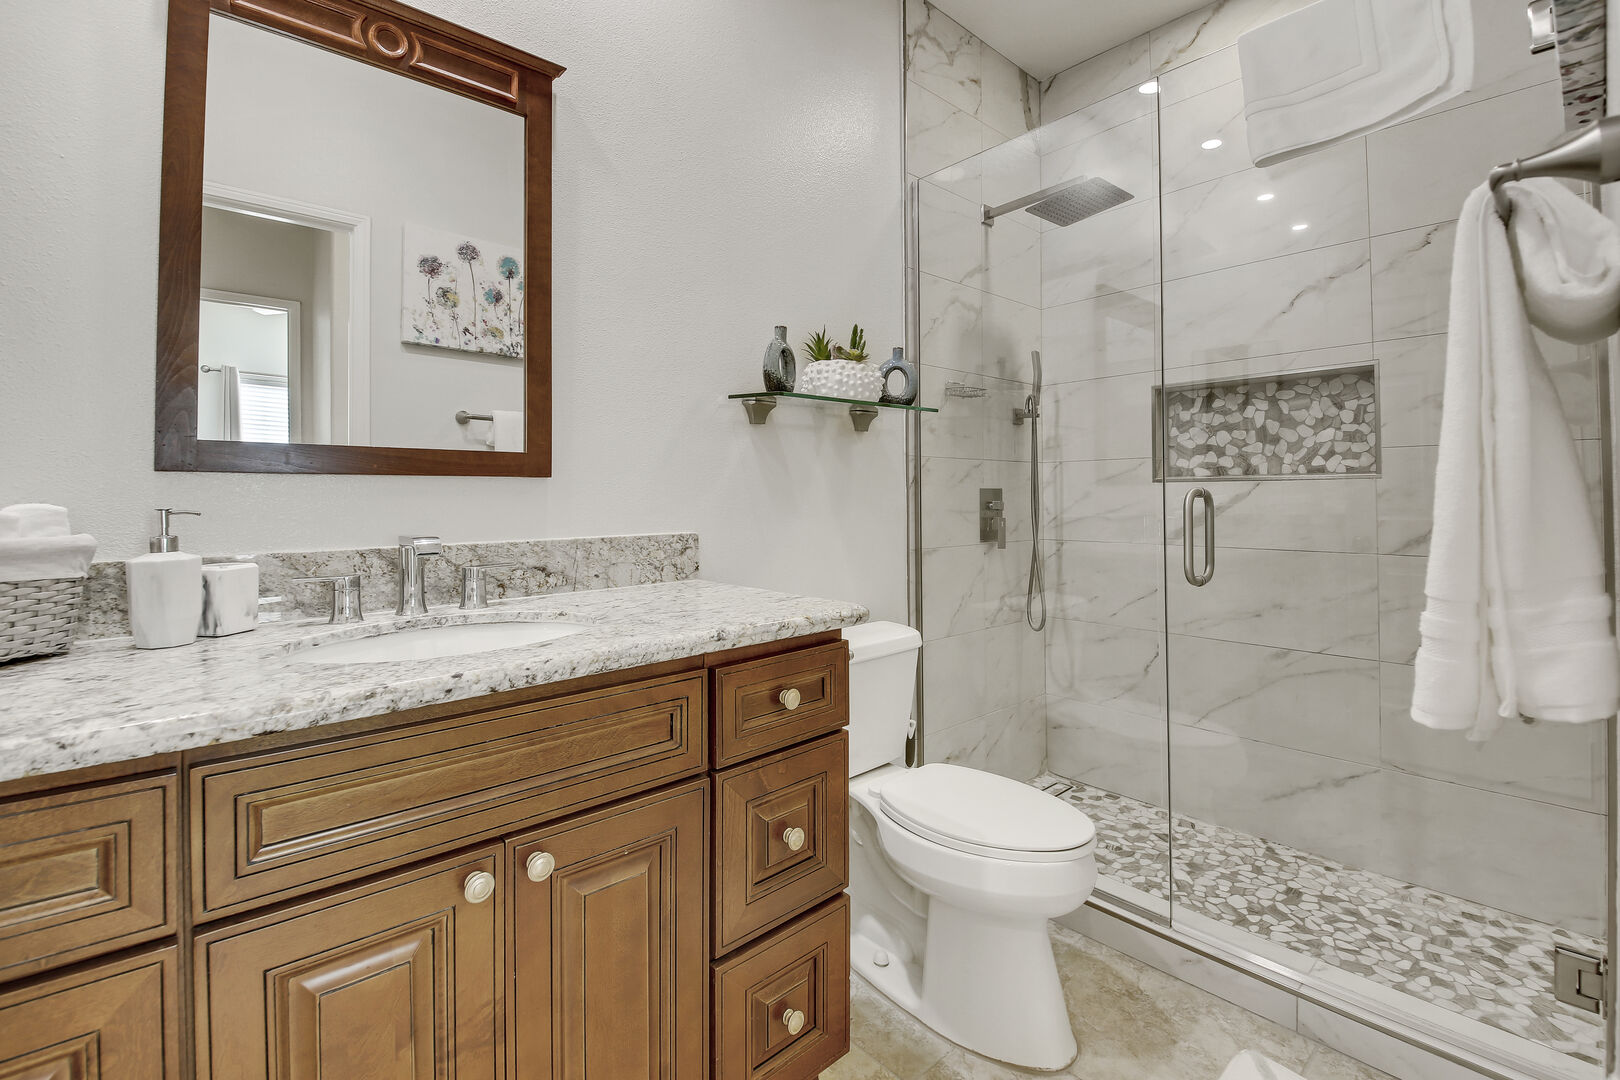 The hallway bathroom is located across bedroom four and features a tile shower and a vanity sink.